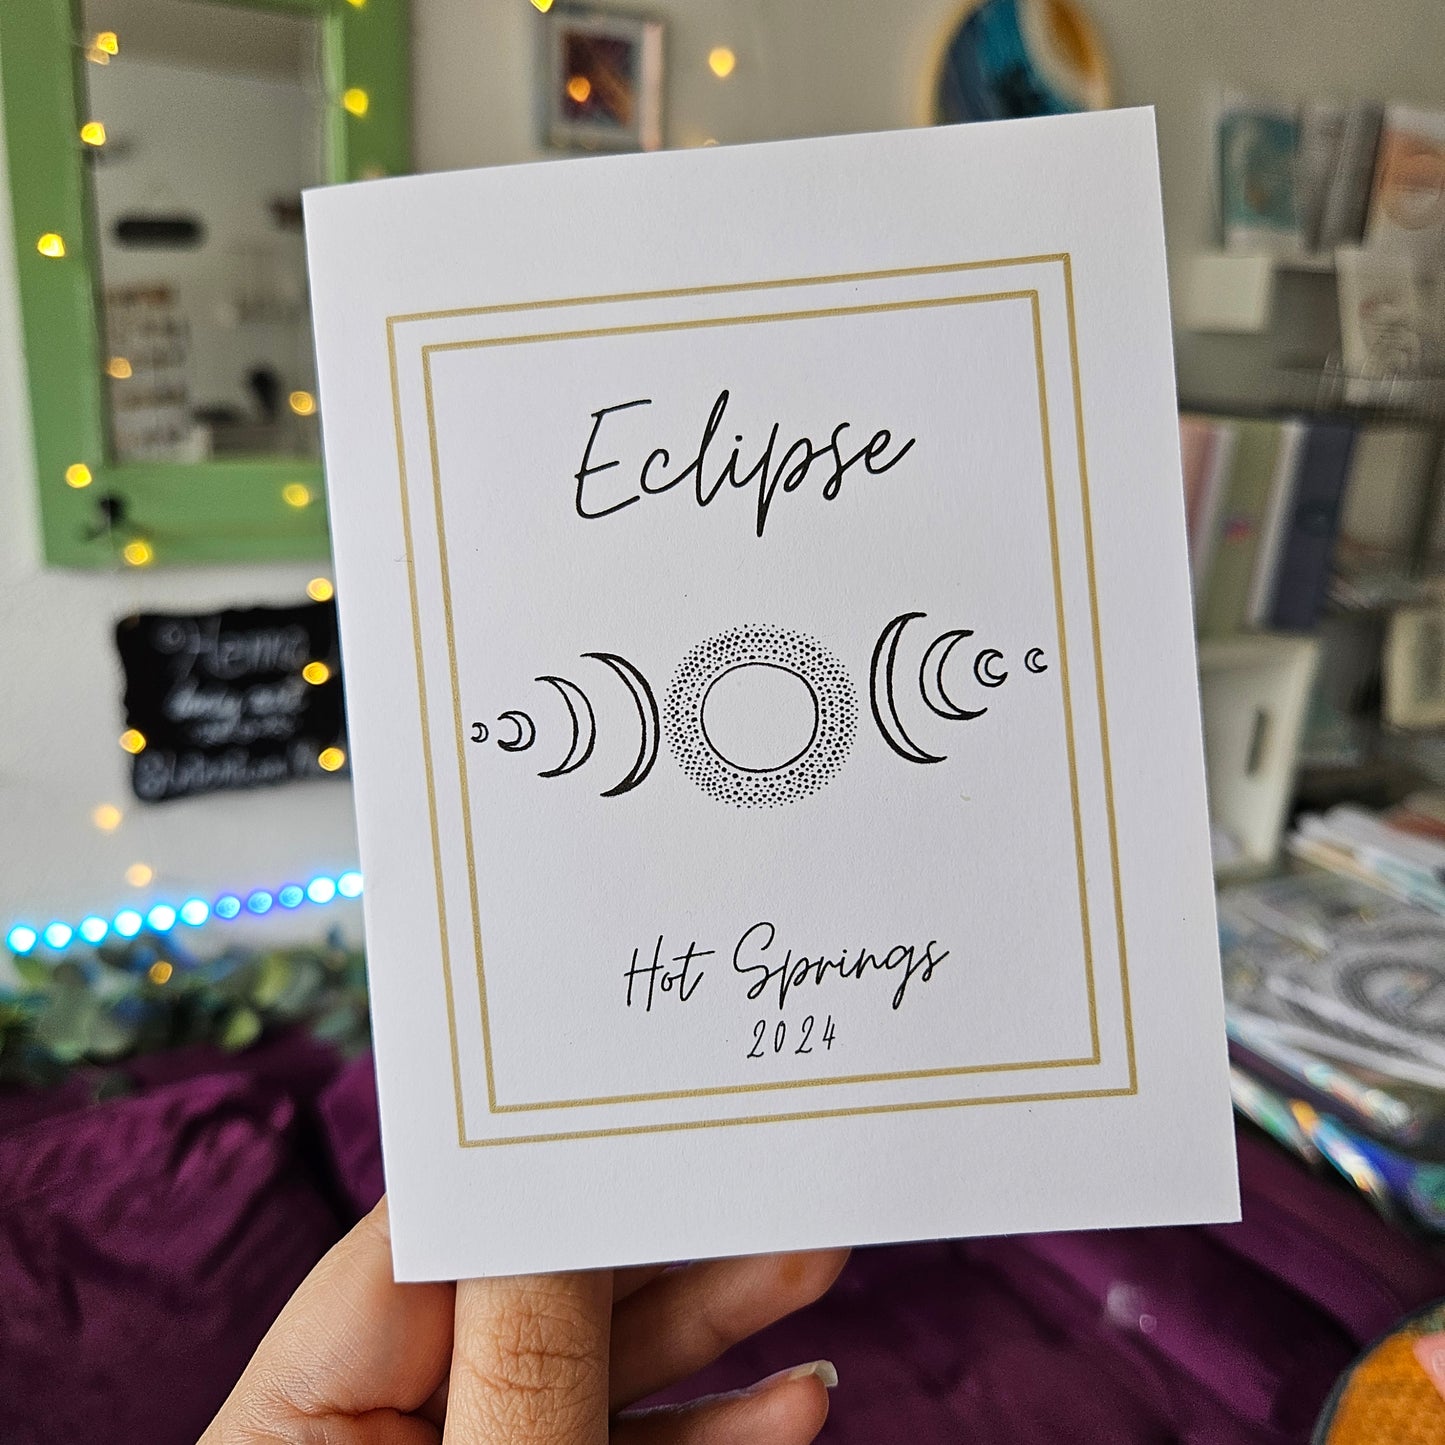 Hot Springs Eclipse 2024 Art Card 4-Pack